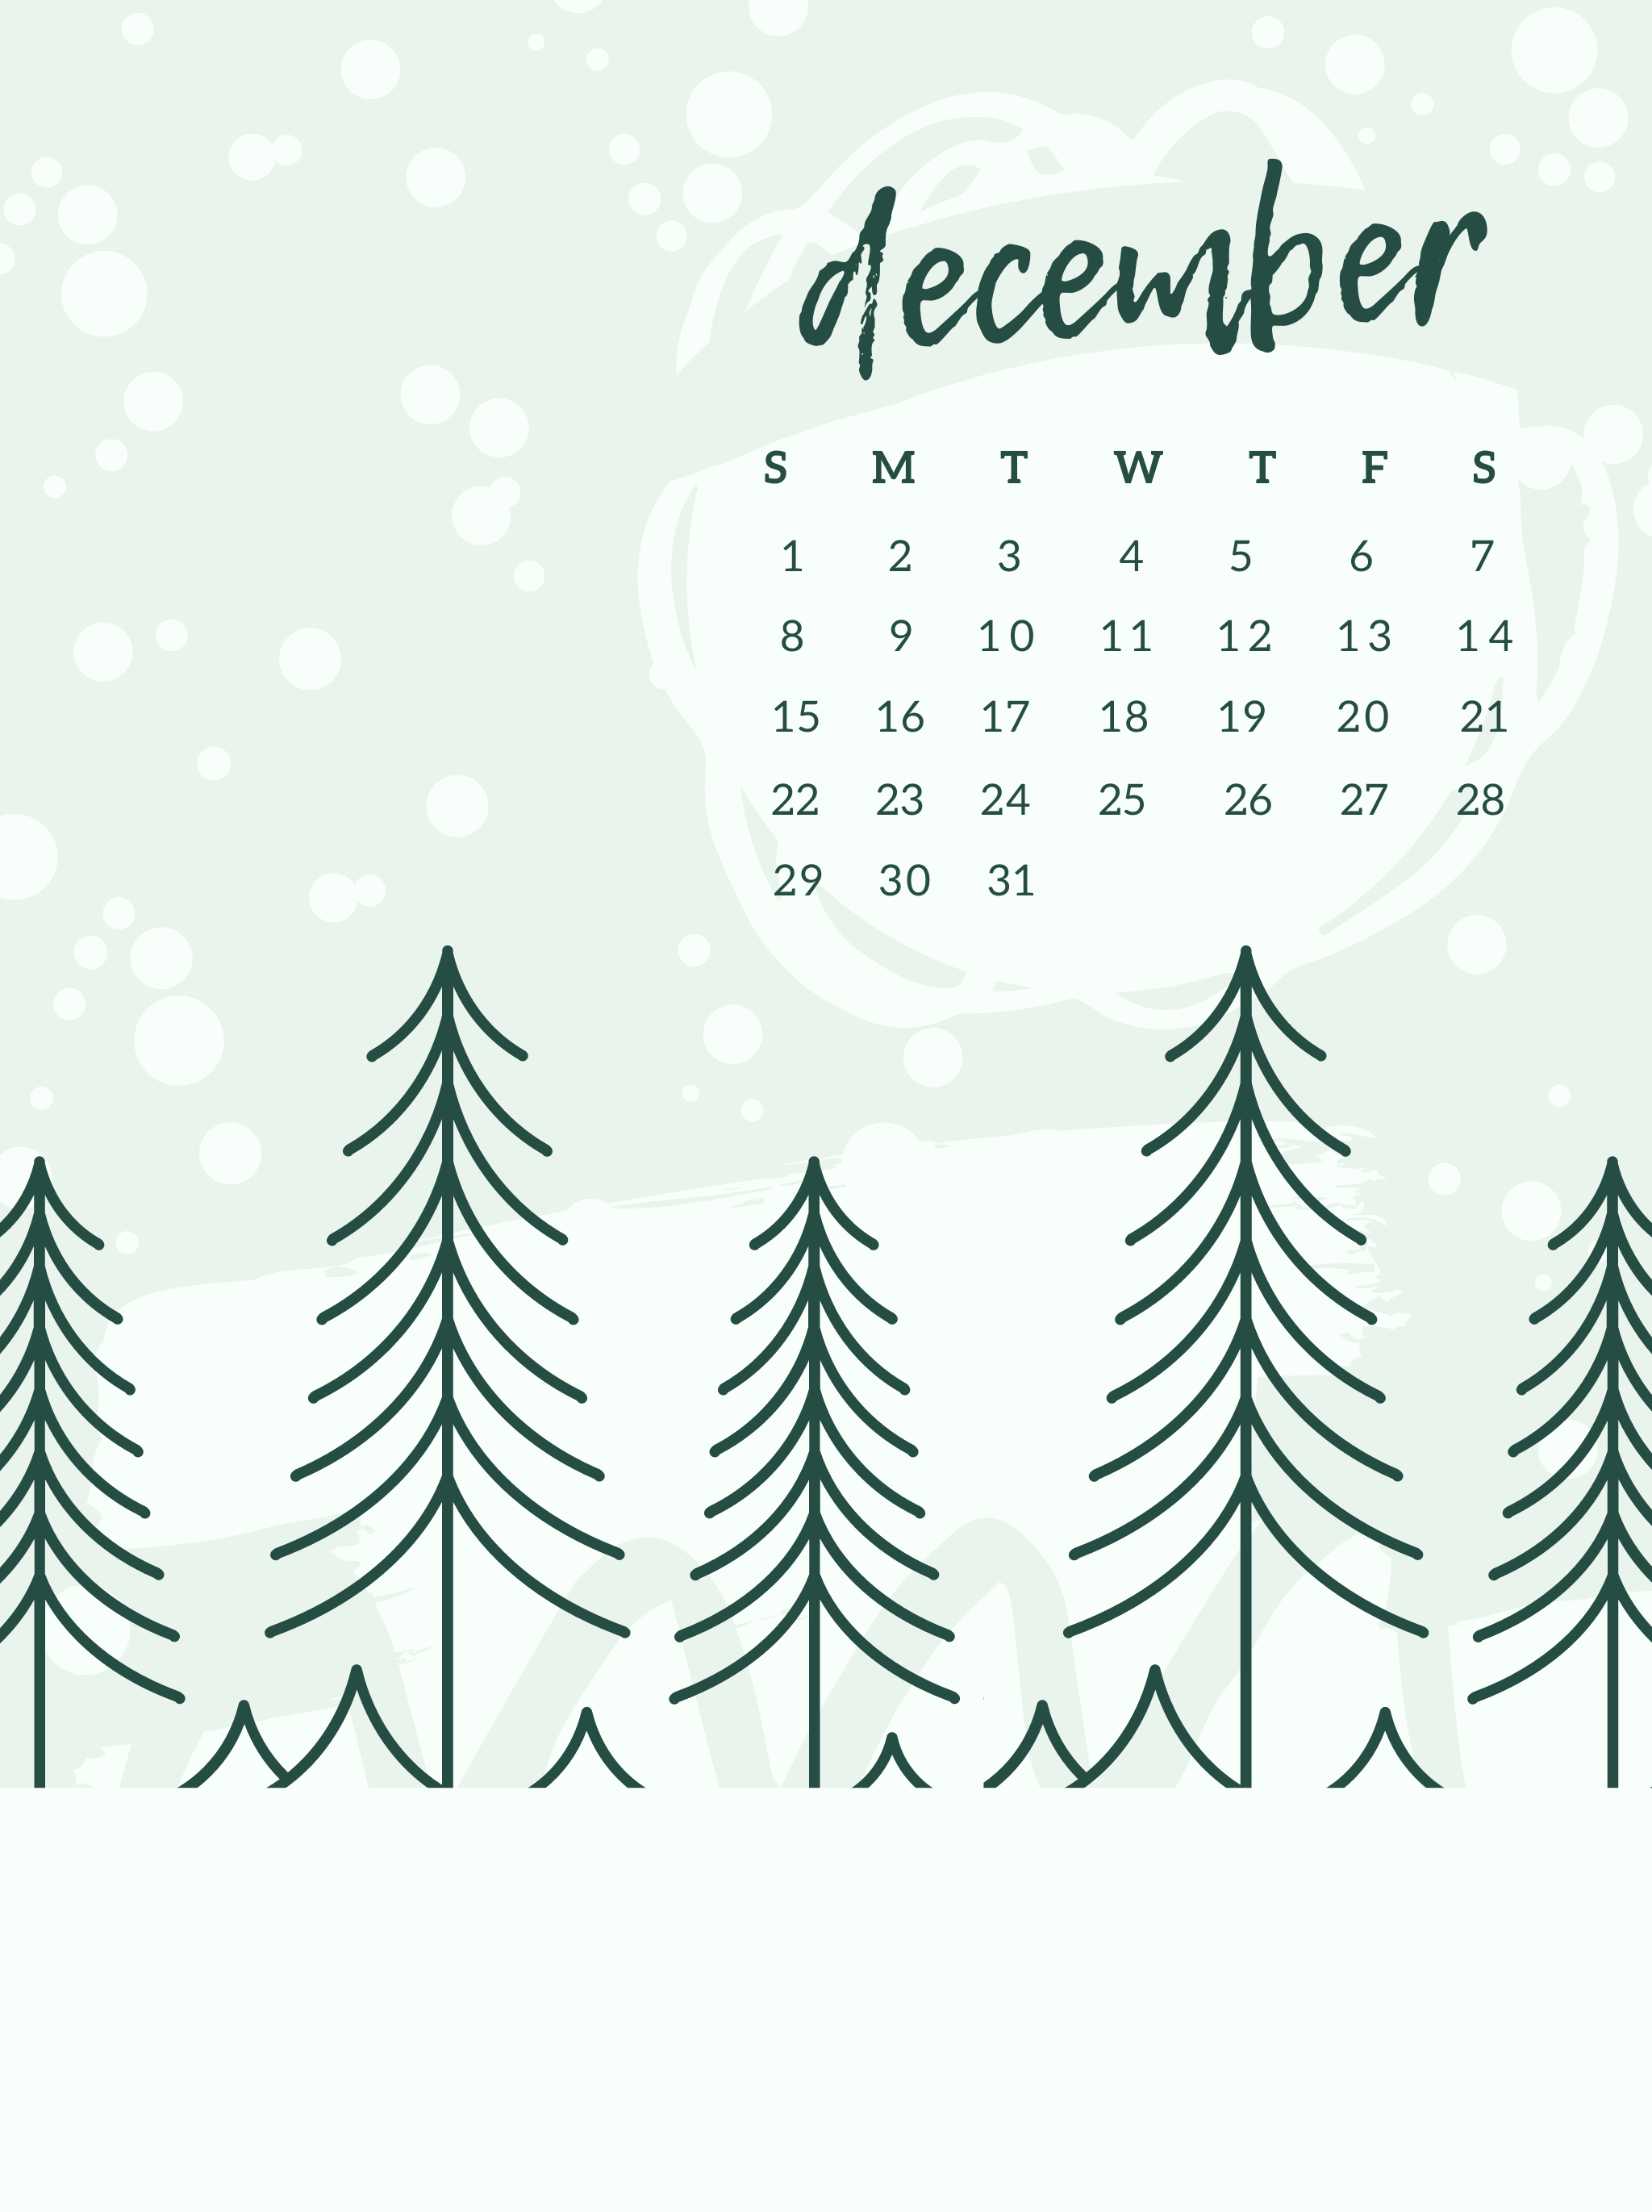 Able iPhone And iPad Wallpaper For December Pro